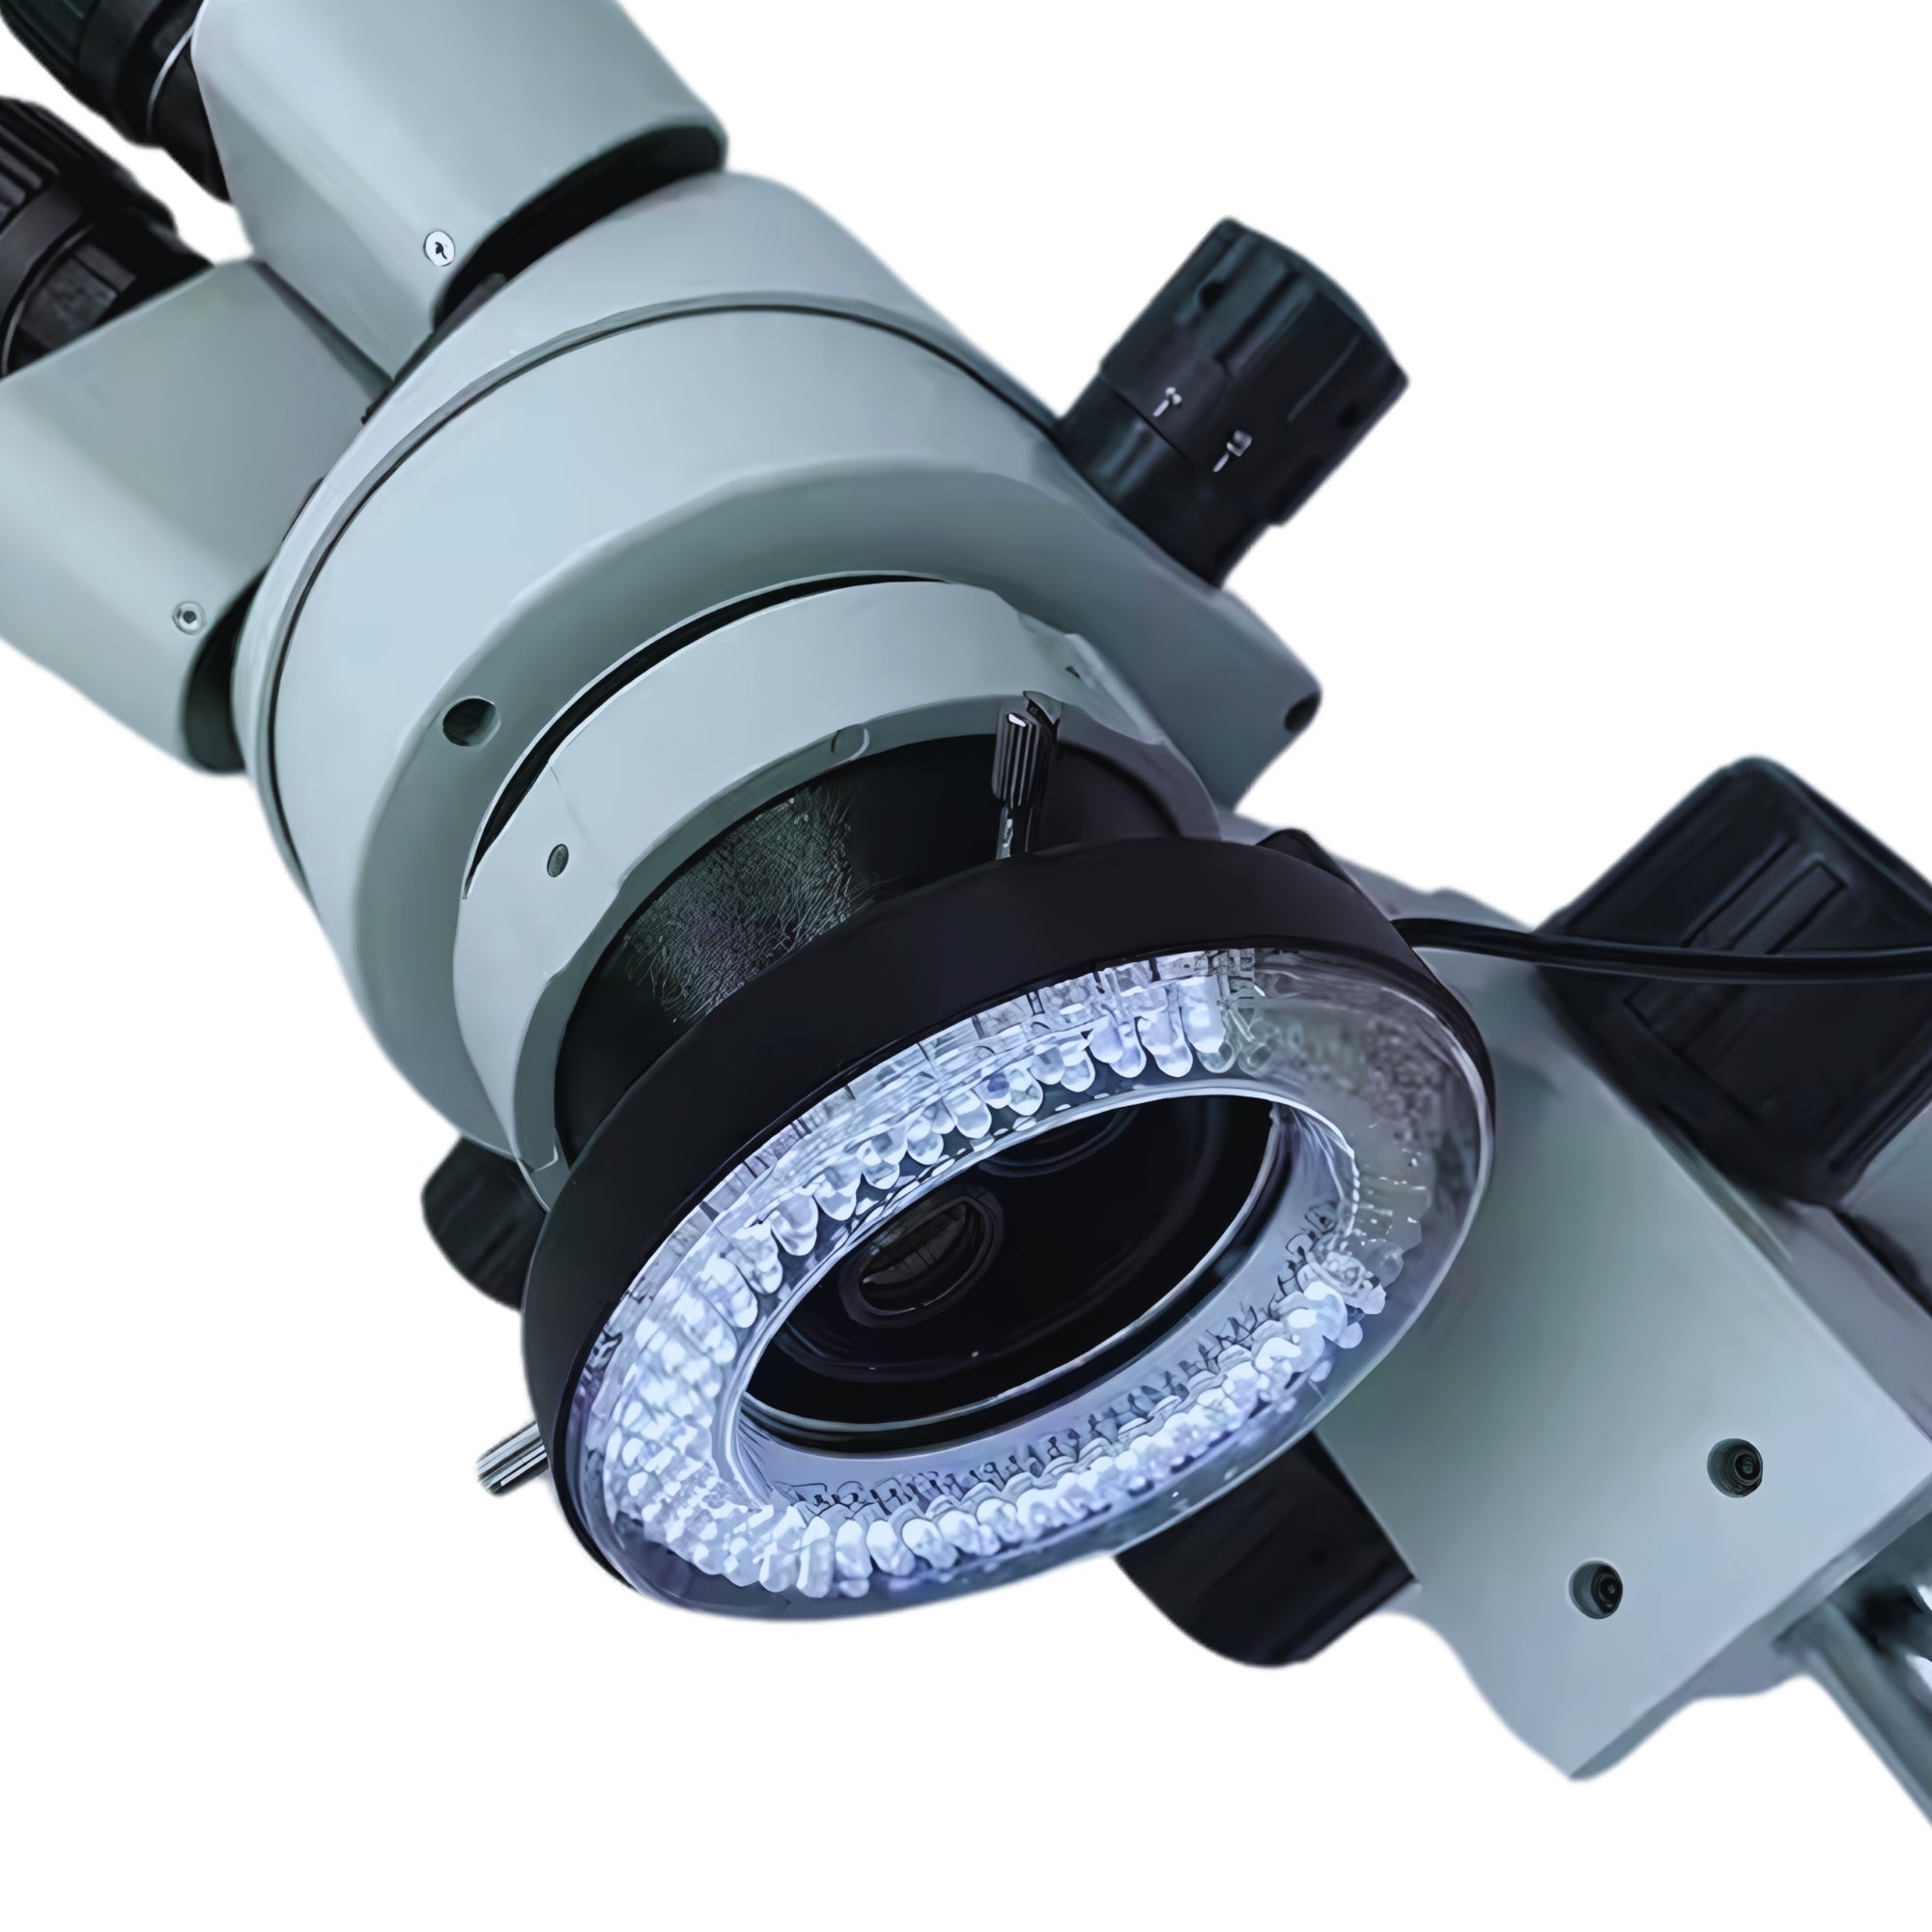 Additional microscope lighting: daylight and ultraviolet light with light direction positioning